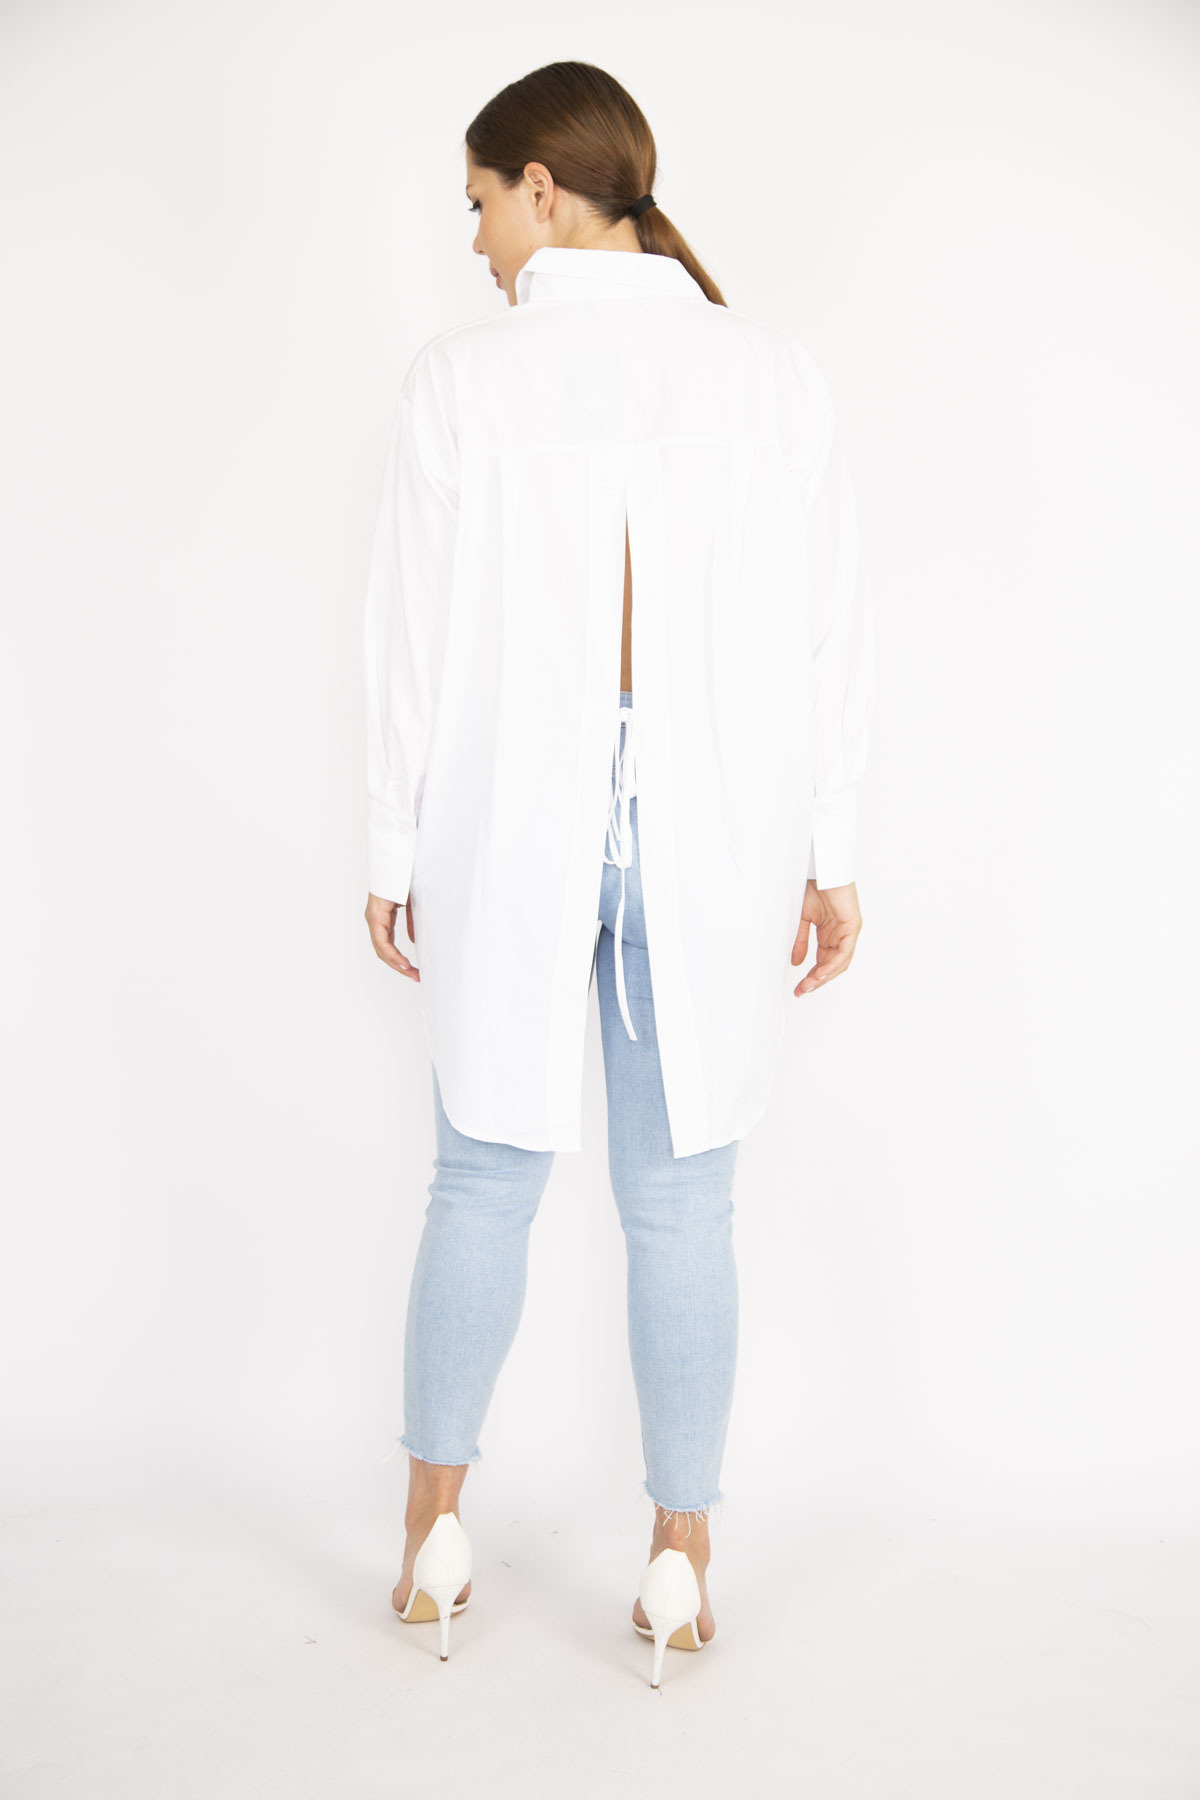 Şans Women's Plus Size White Shirt with a slit and lace detail in the back and front button down